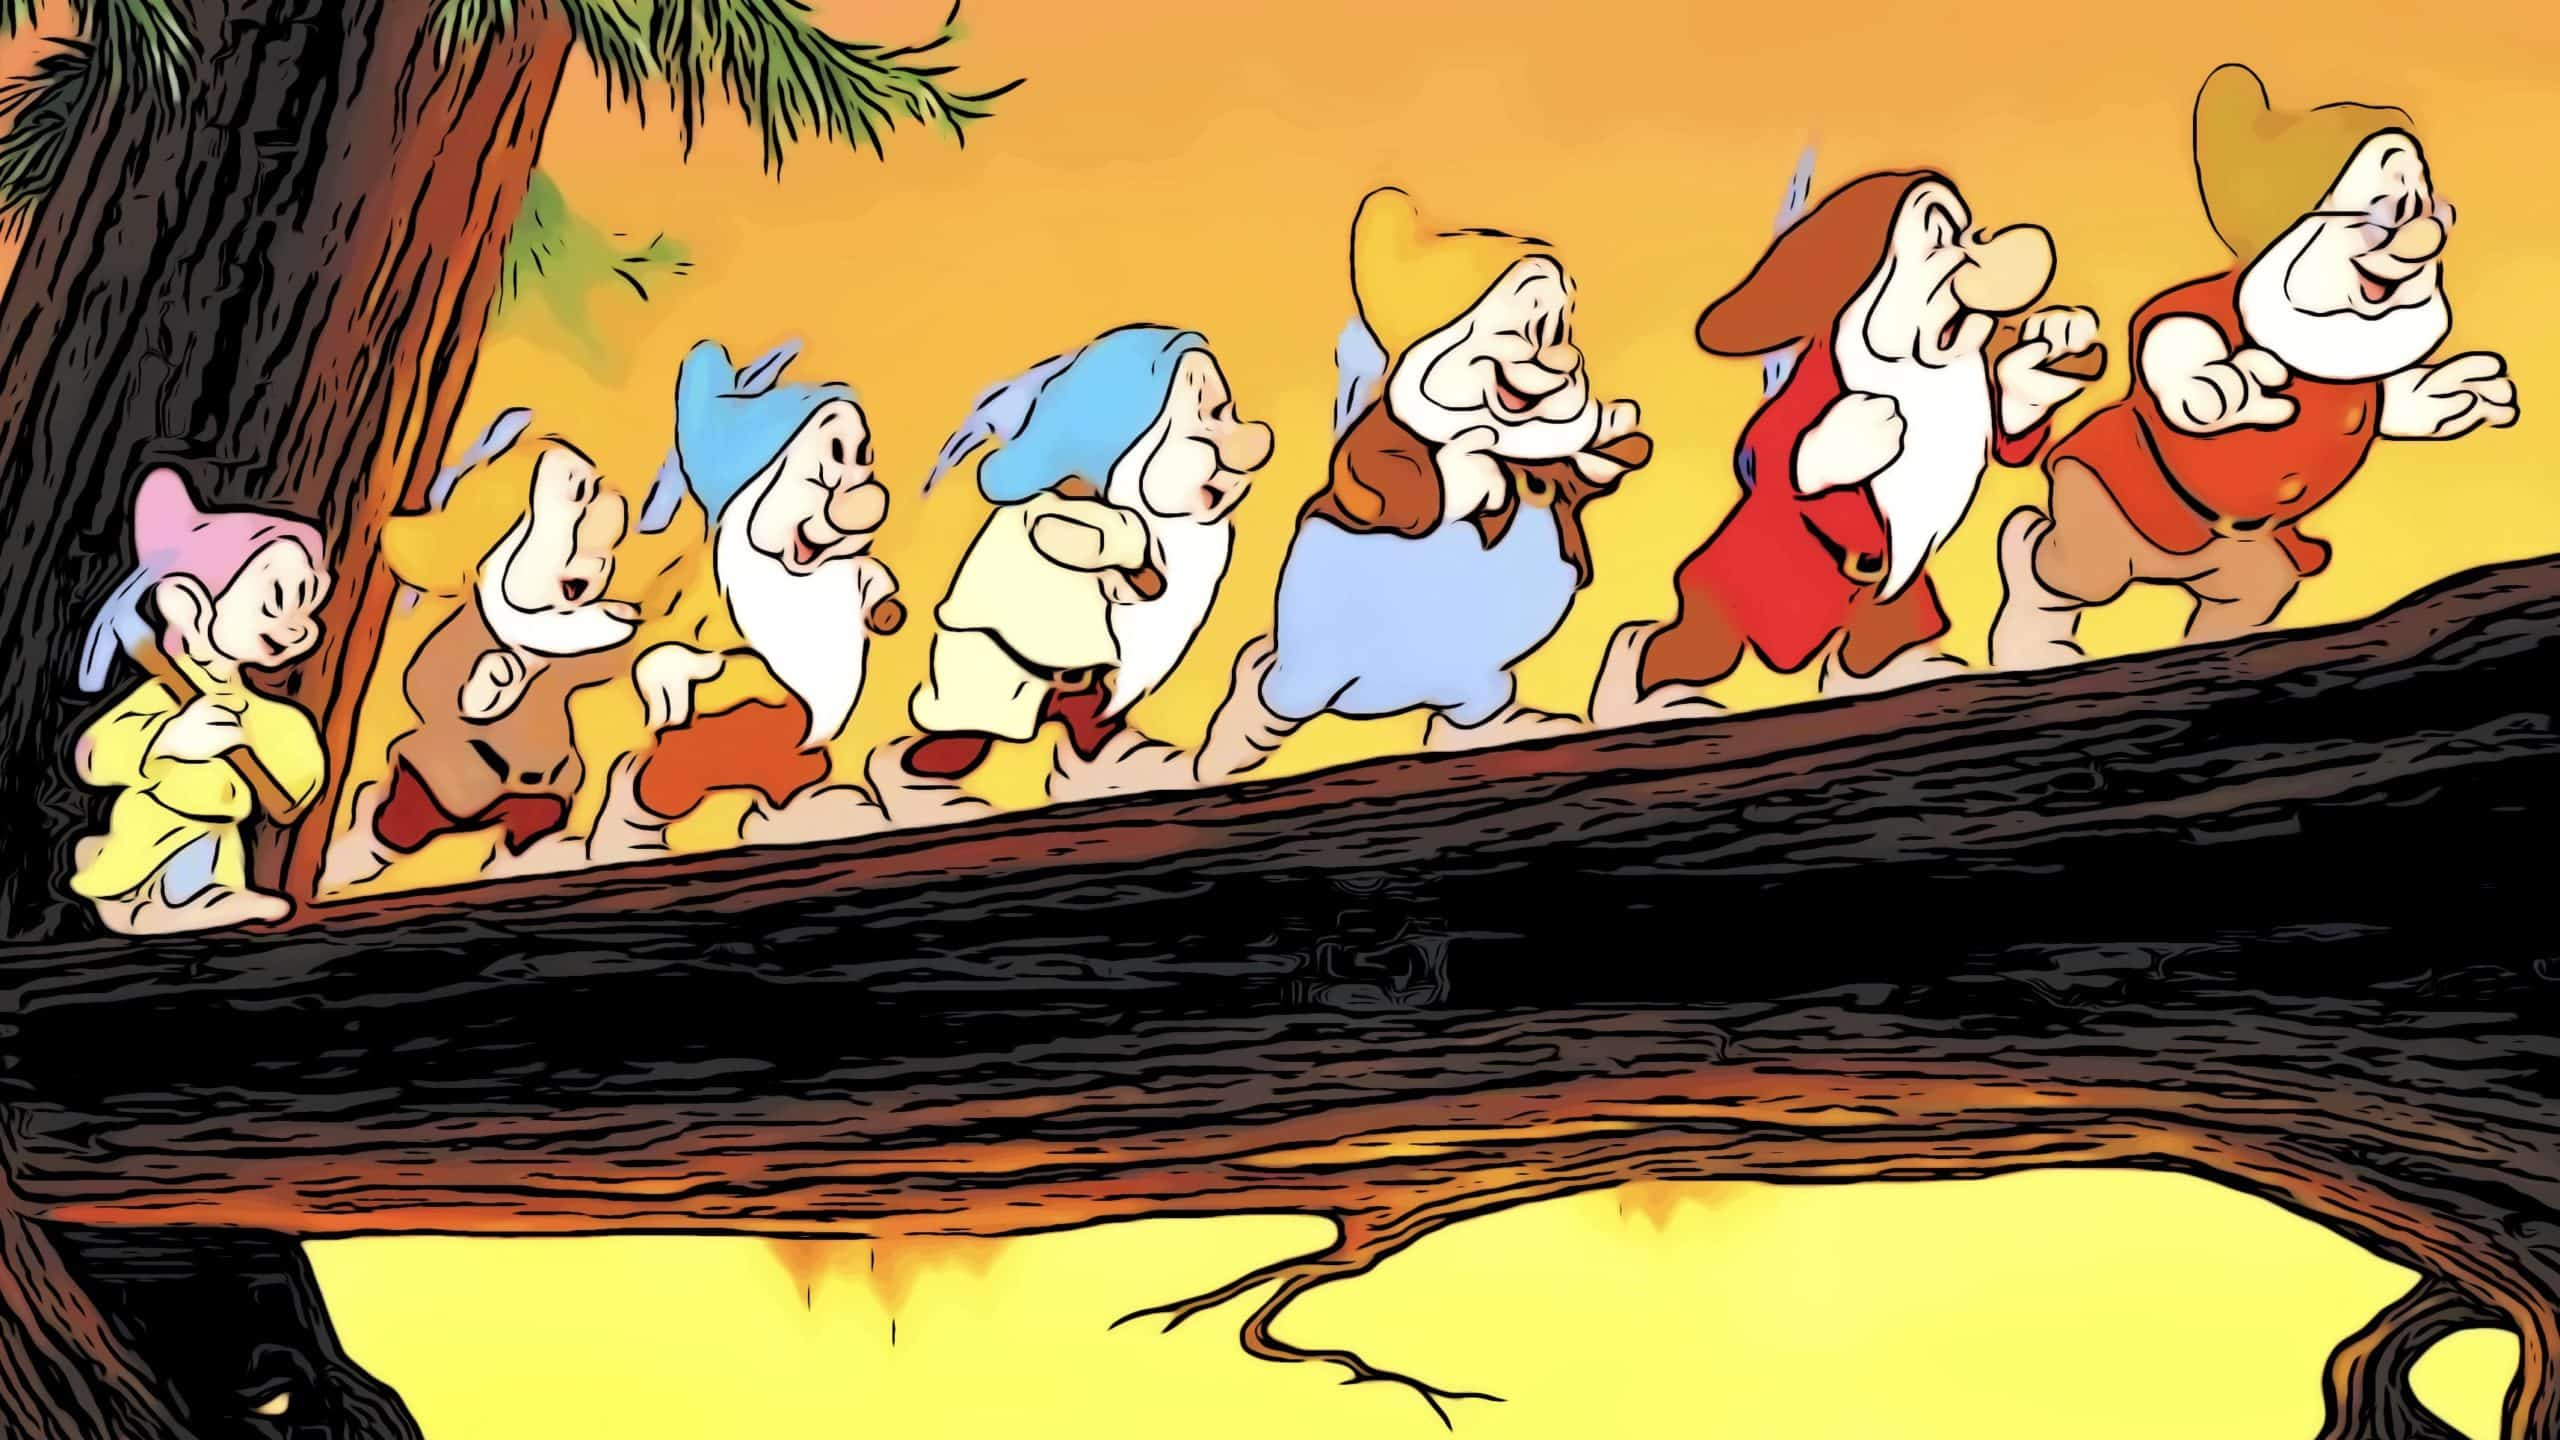 2560x1440 Here Are The 7 Dwarfs Names + Interesting Facts About Them Endless Popcor